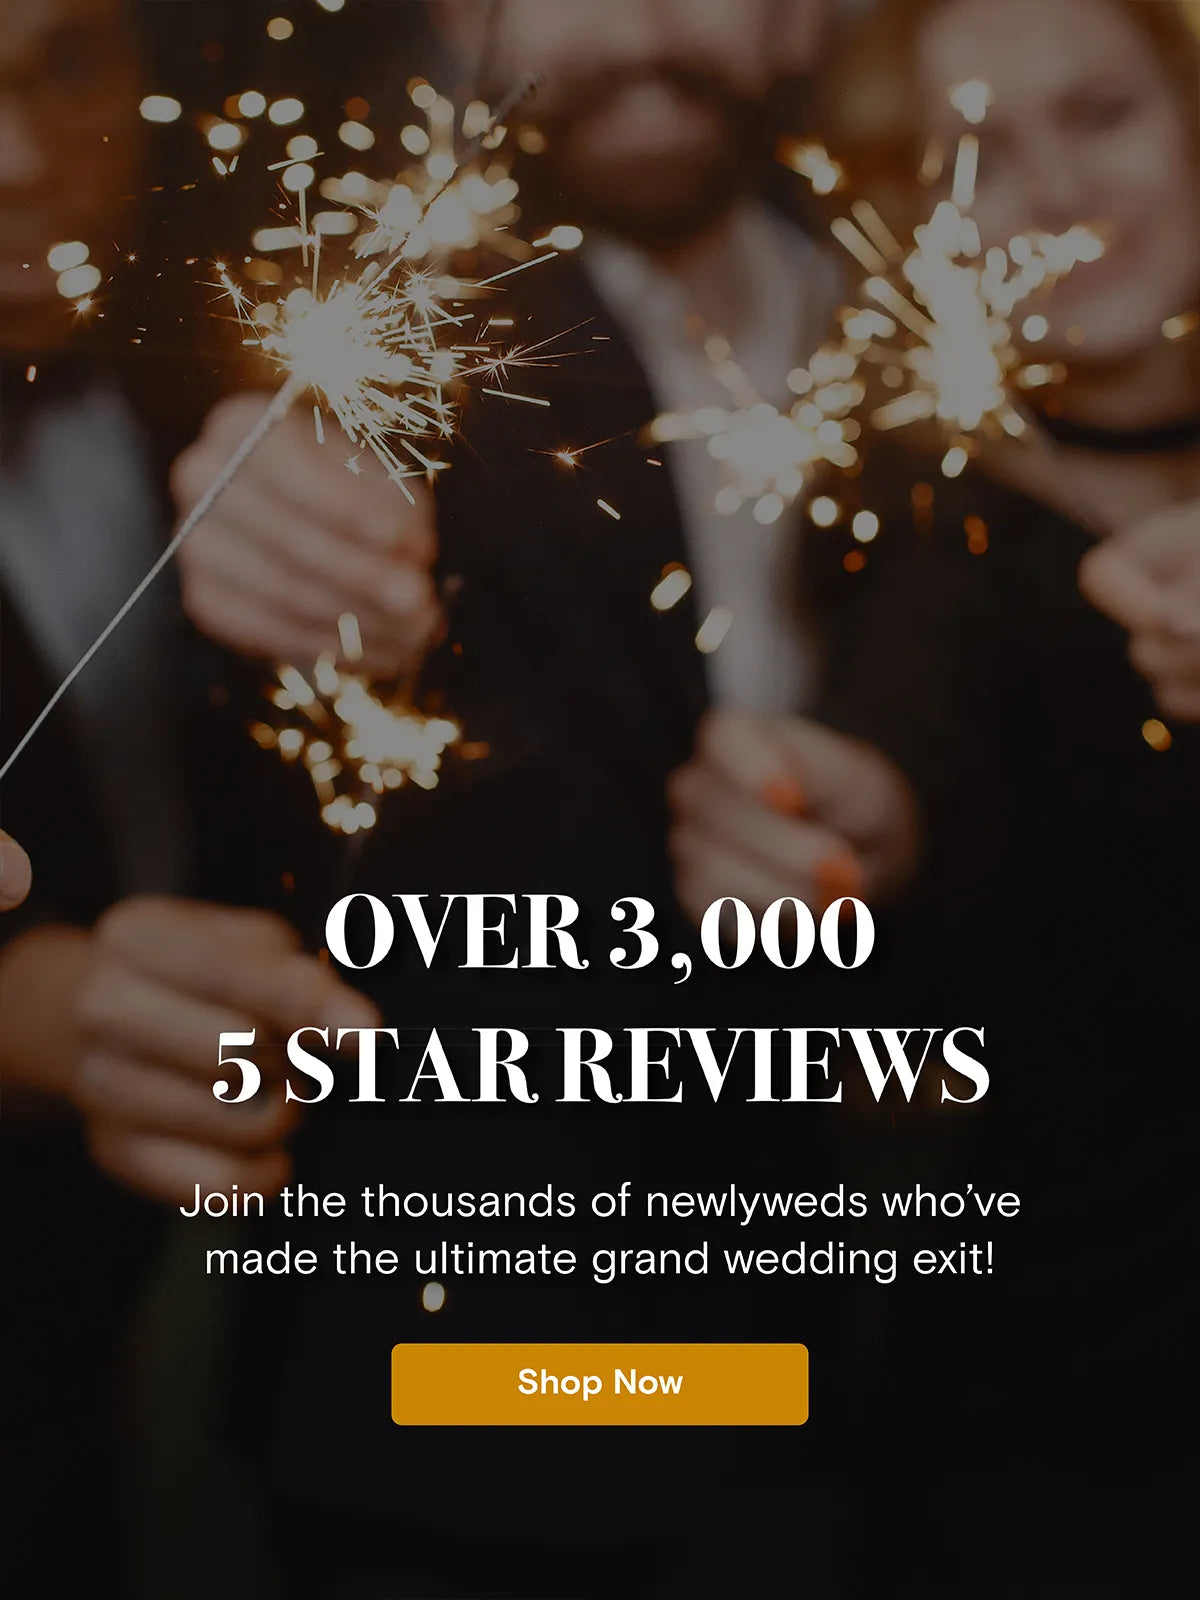 Couple enjoys their sparkling wedding send off, surrounded by guests with sparklers.